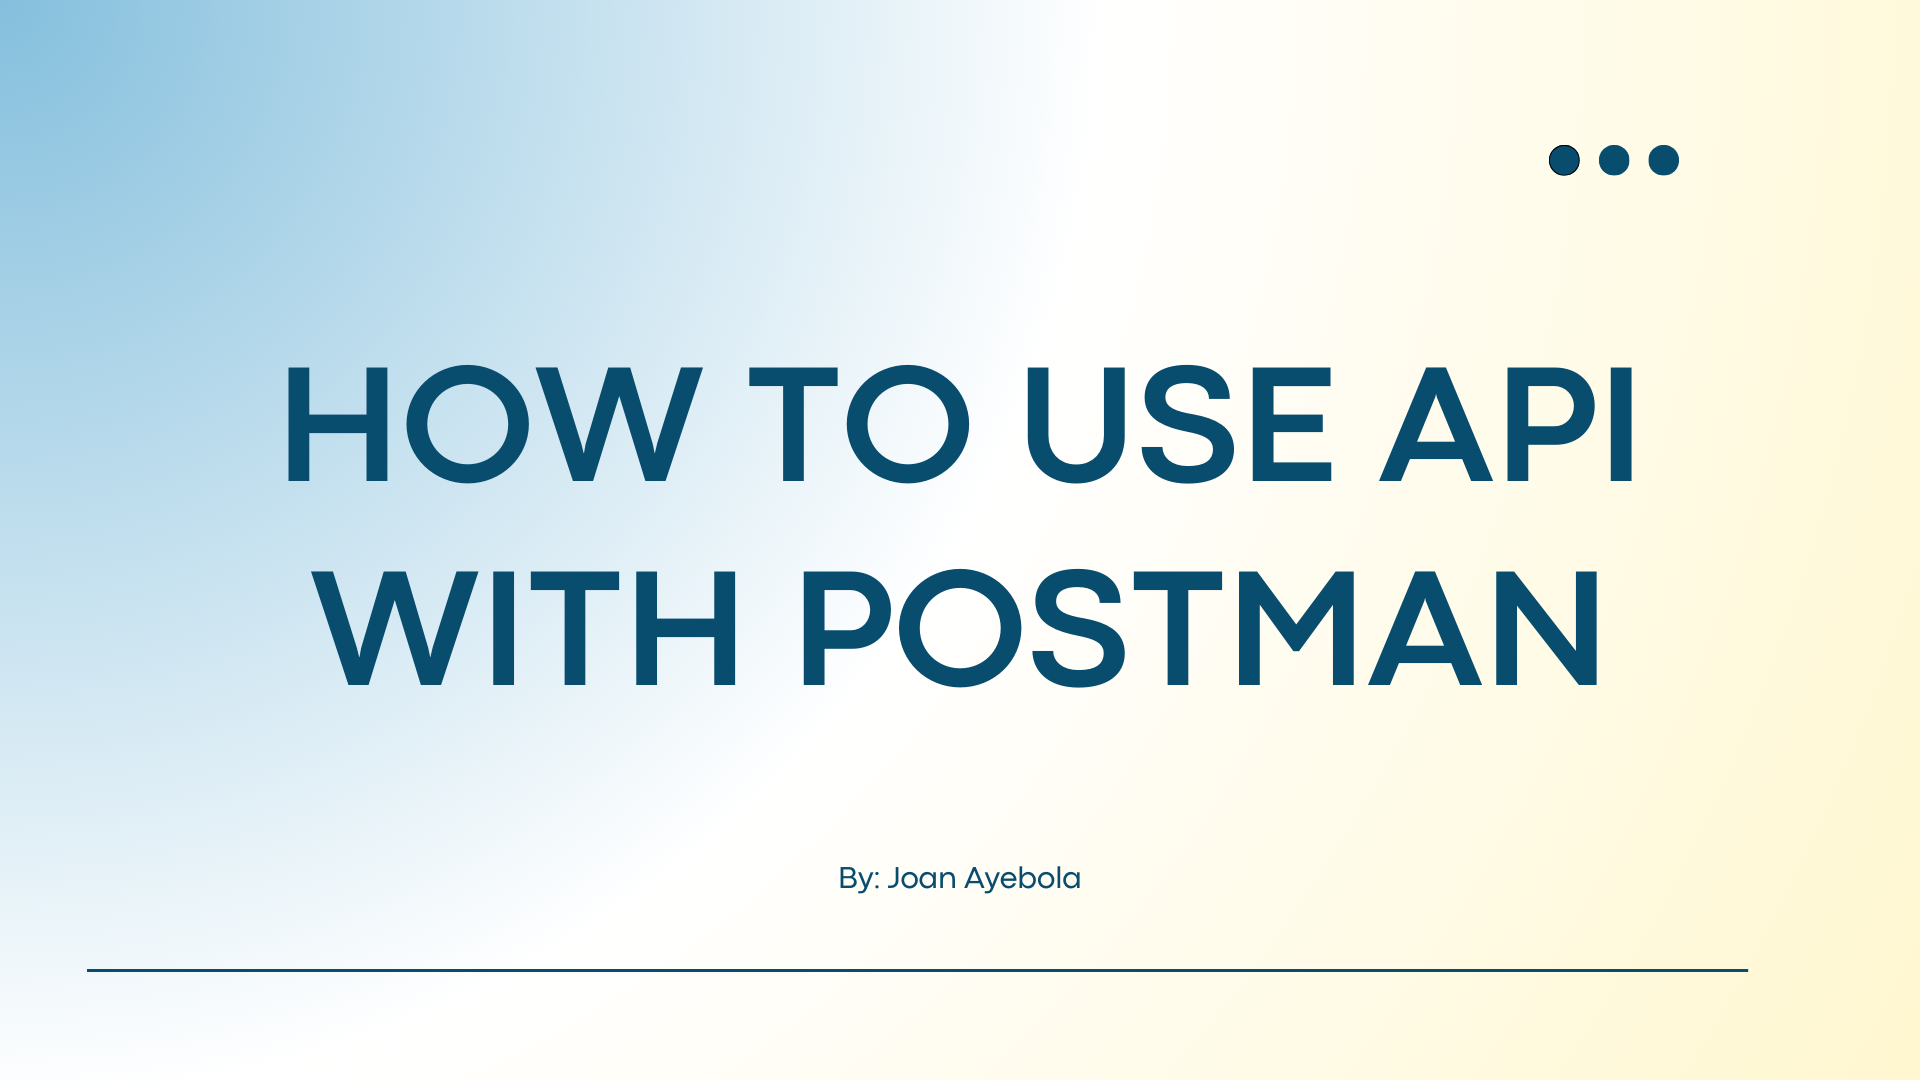 How to Use an API with Postman – A Step-by-Step Guide